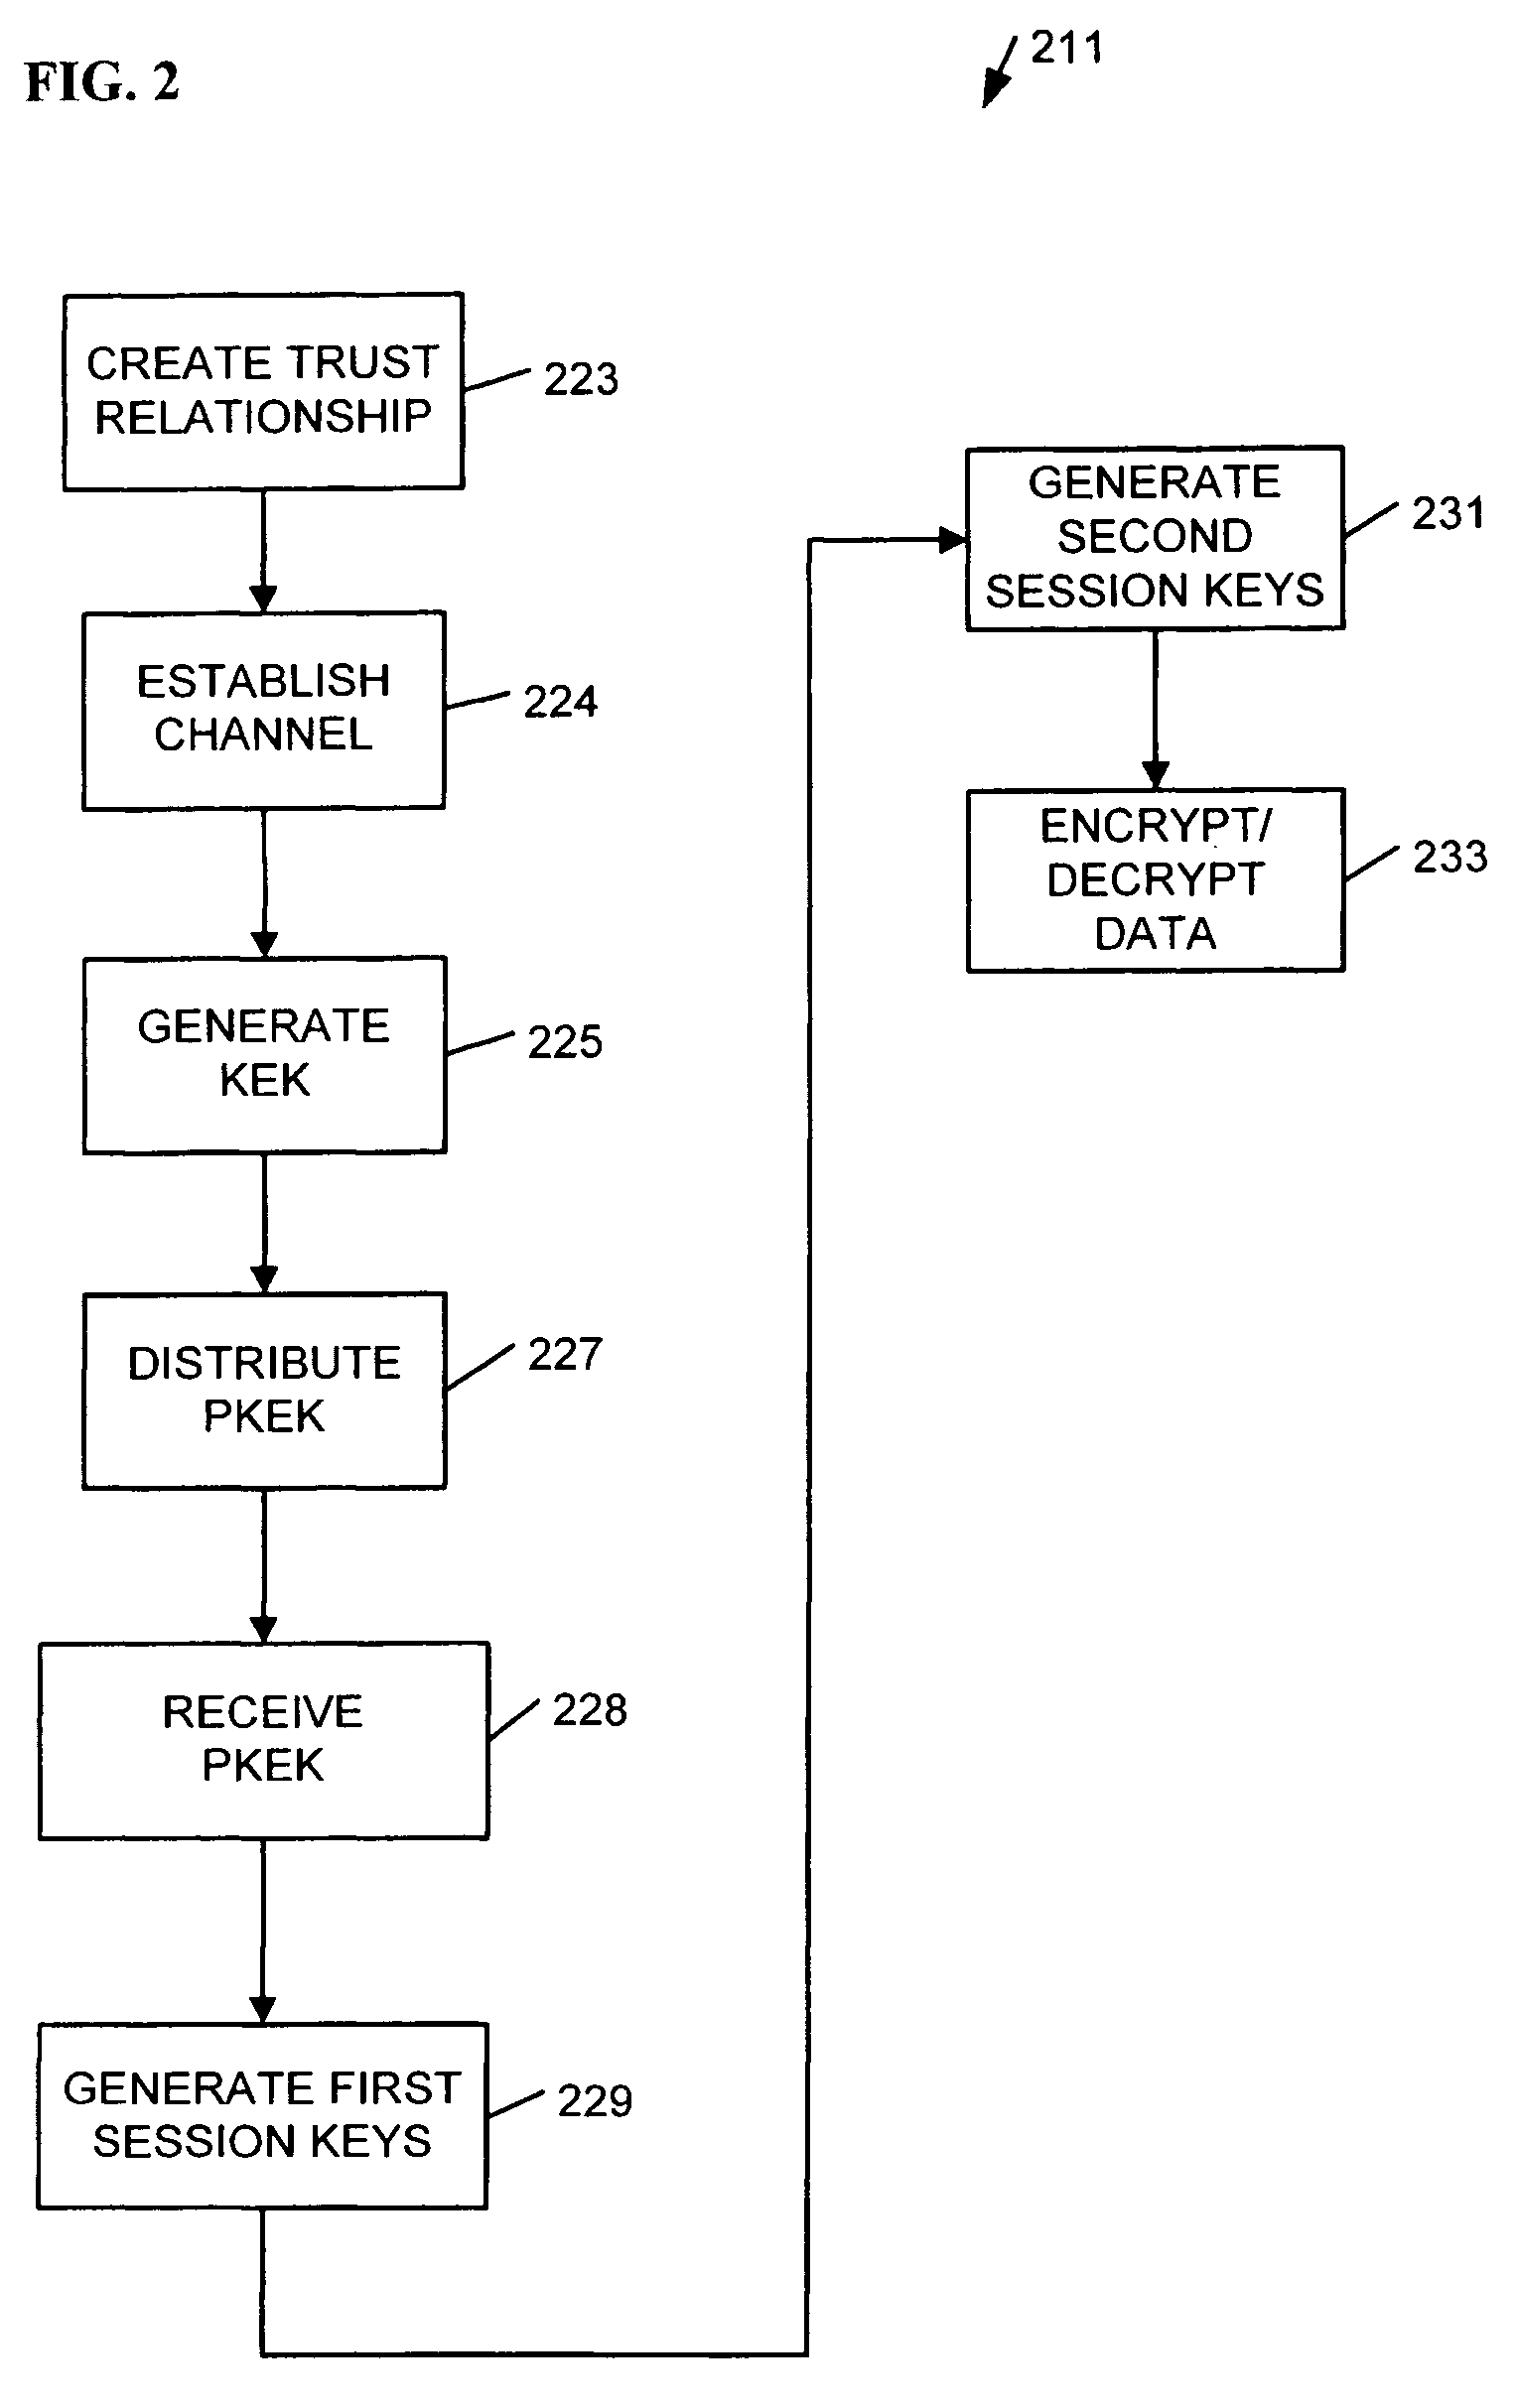 Trusted platform module apparatus, systems, and methods